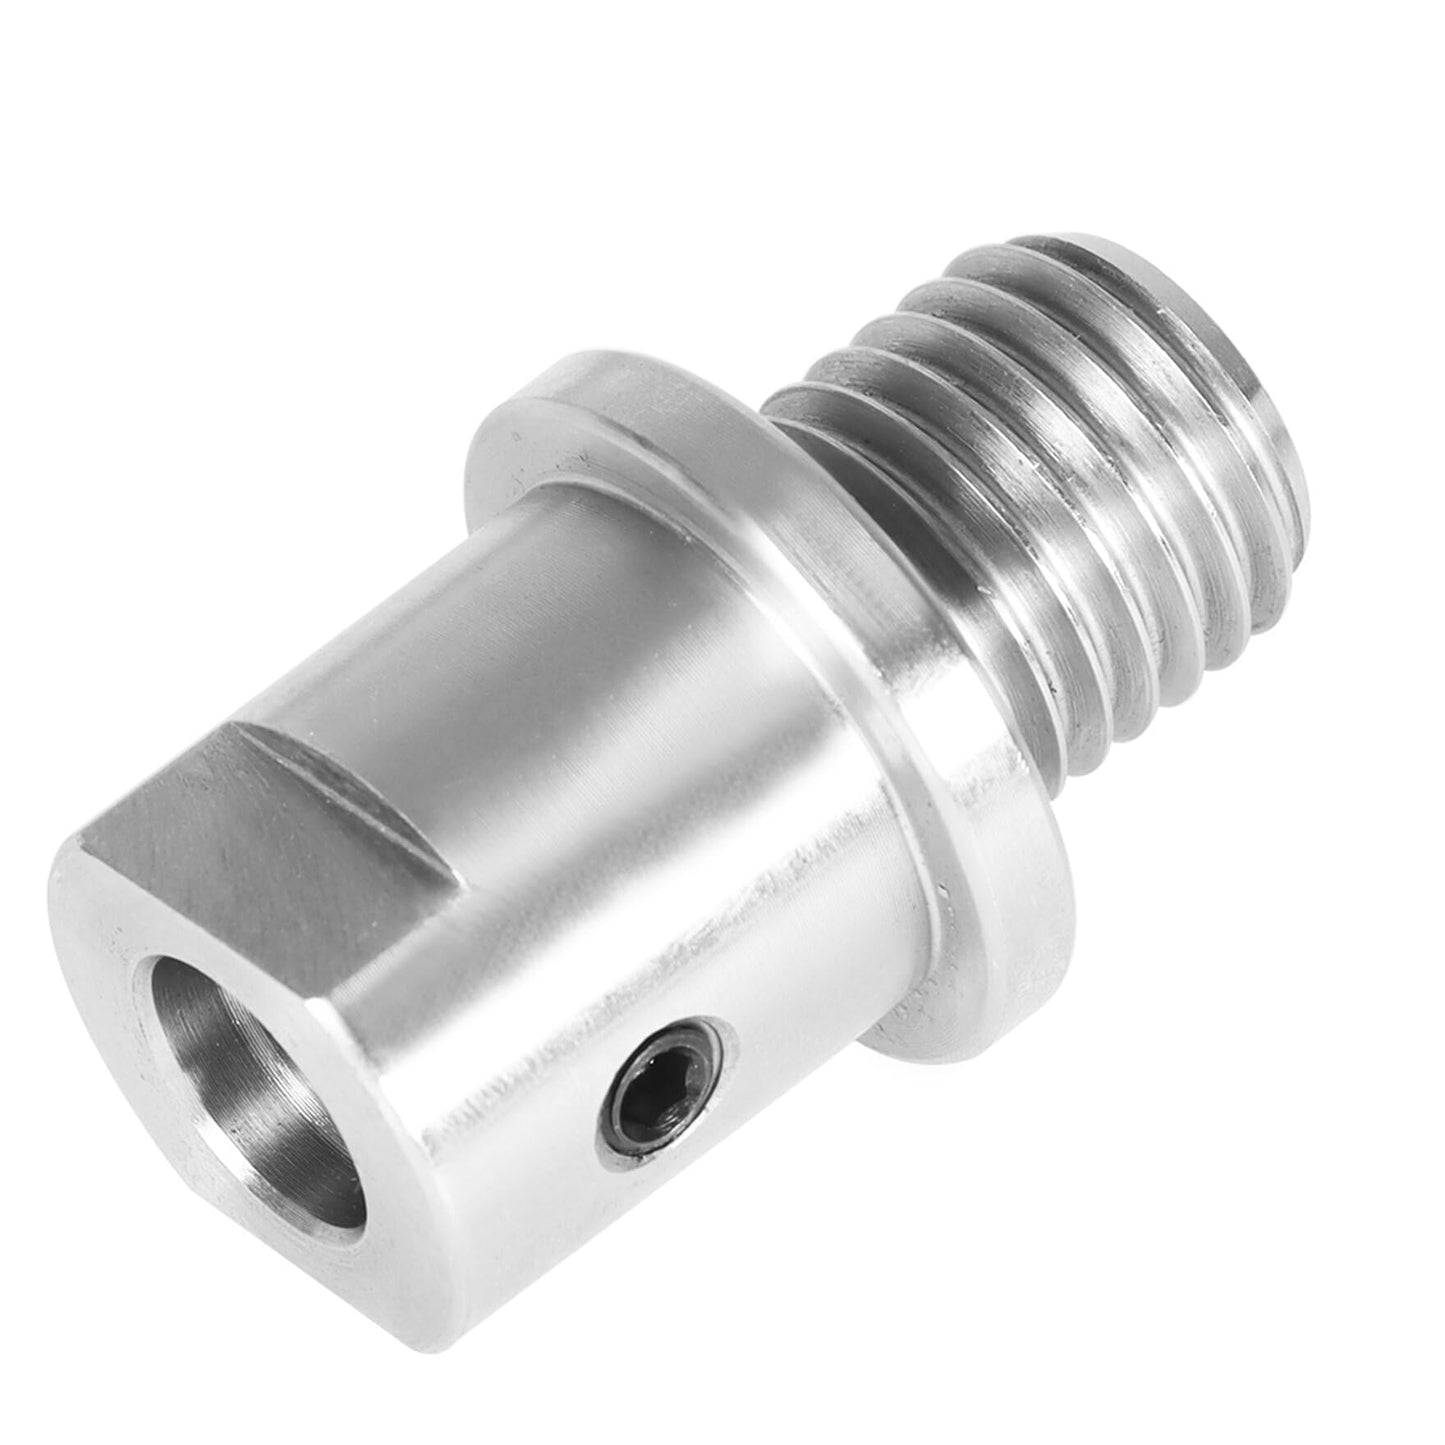 waltyotur Woodworking Lathe Headstock Spindle Adapter, Converts 3/4 Inch x 10 TPI to 1 Inch x 8TPI Lathe Headstock Spindle Adapter